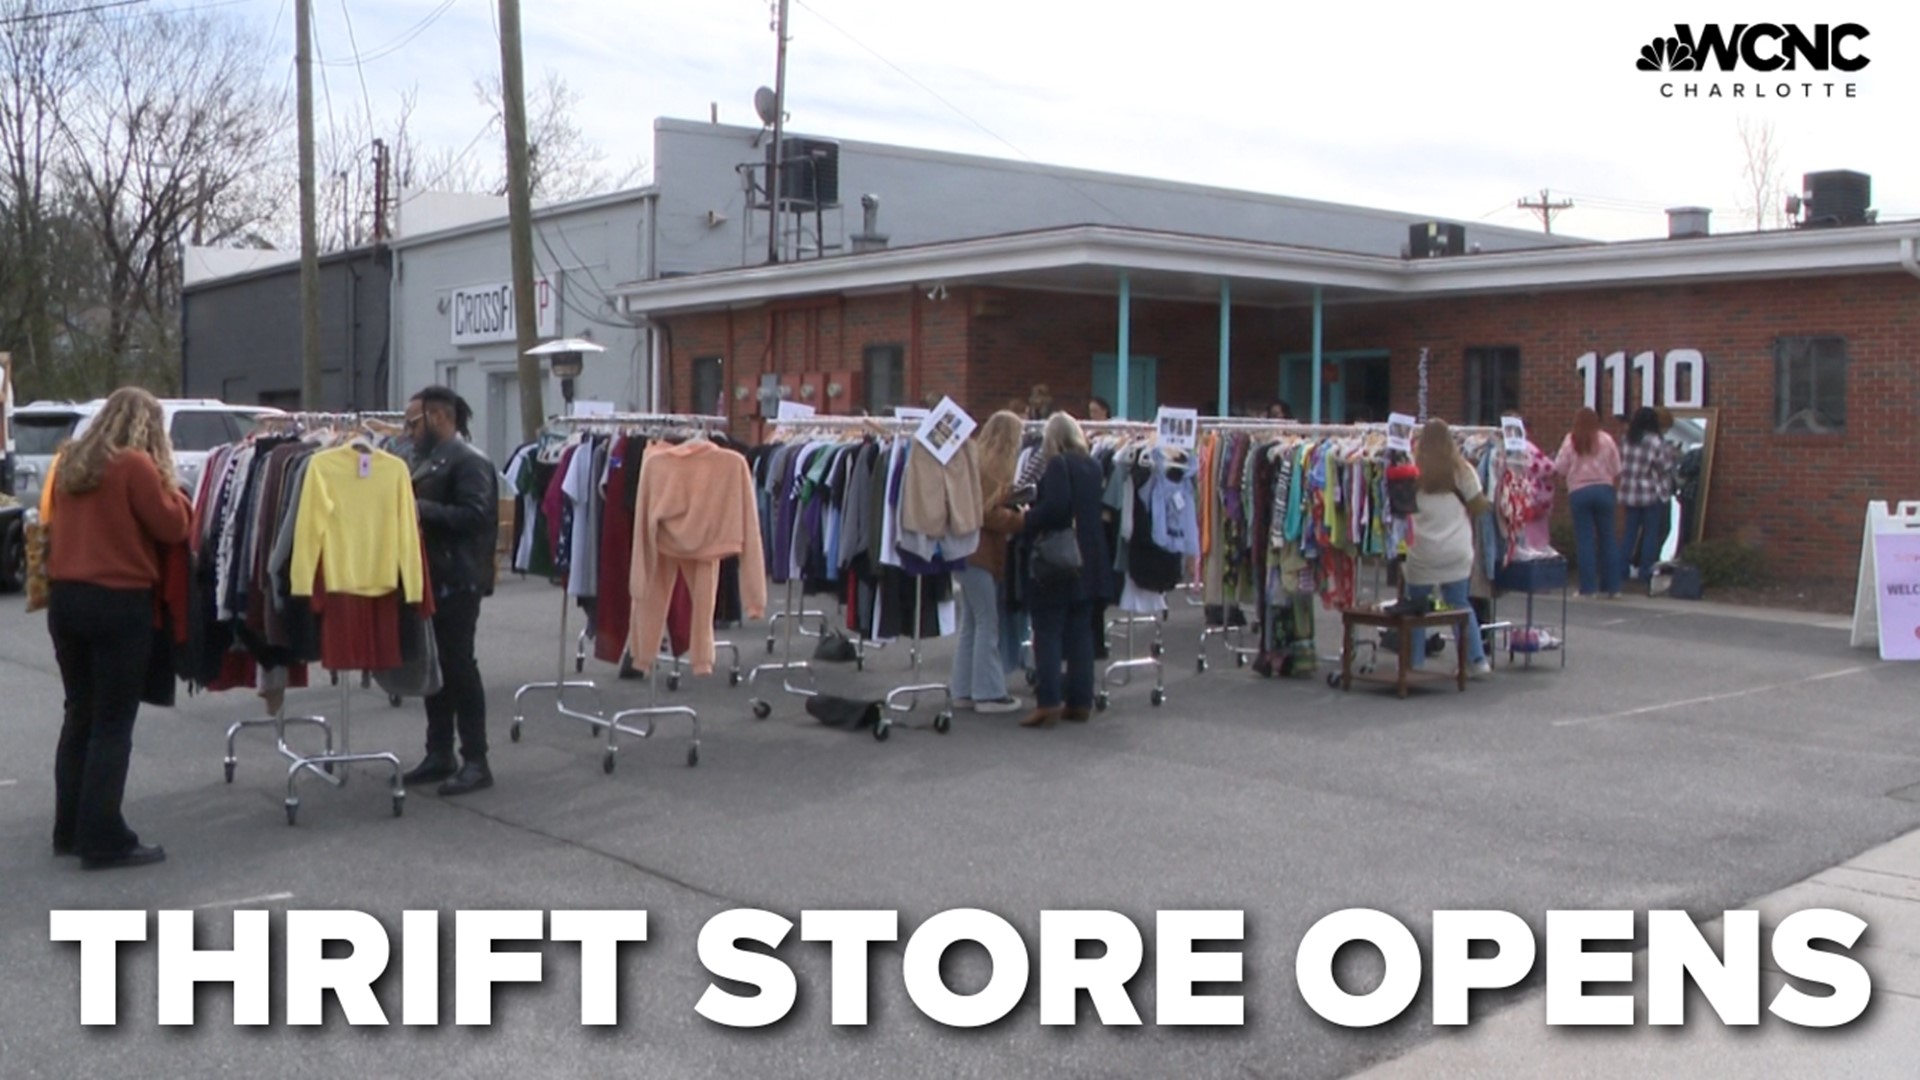 Today was the grand opening of a new thrift store, Thrift Pony. It's located just off Commonwealth Avenue near Independence Boulevard.